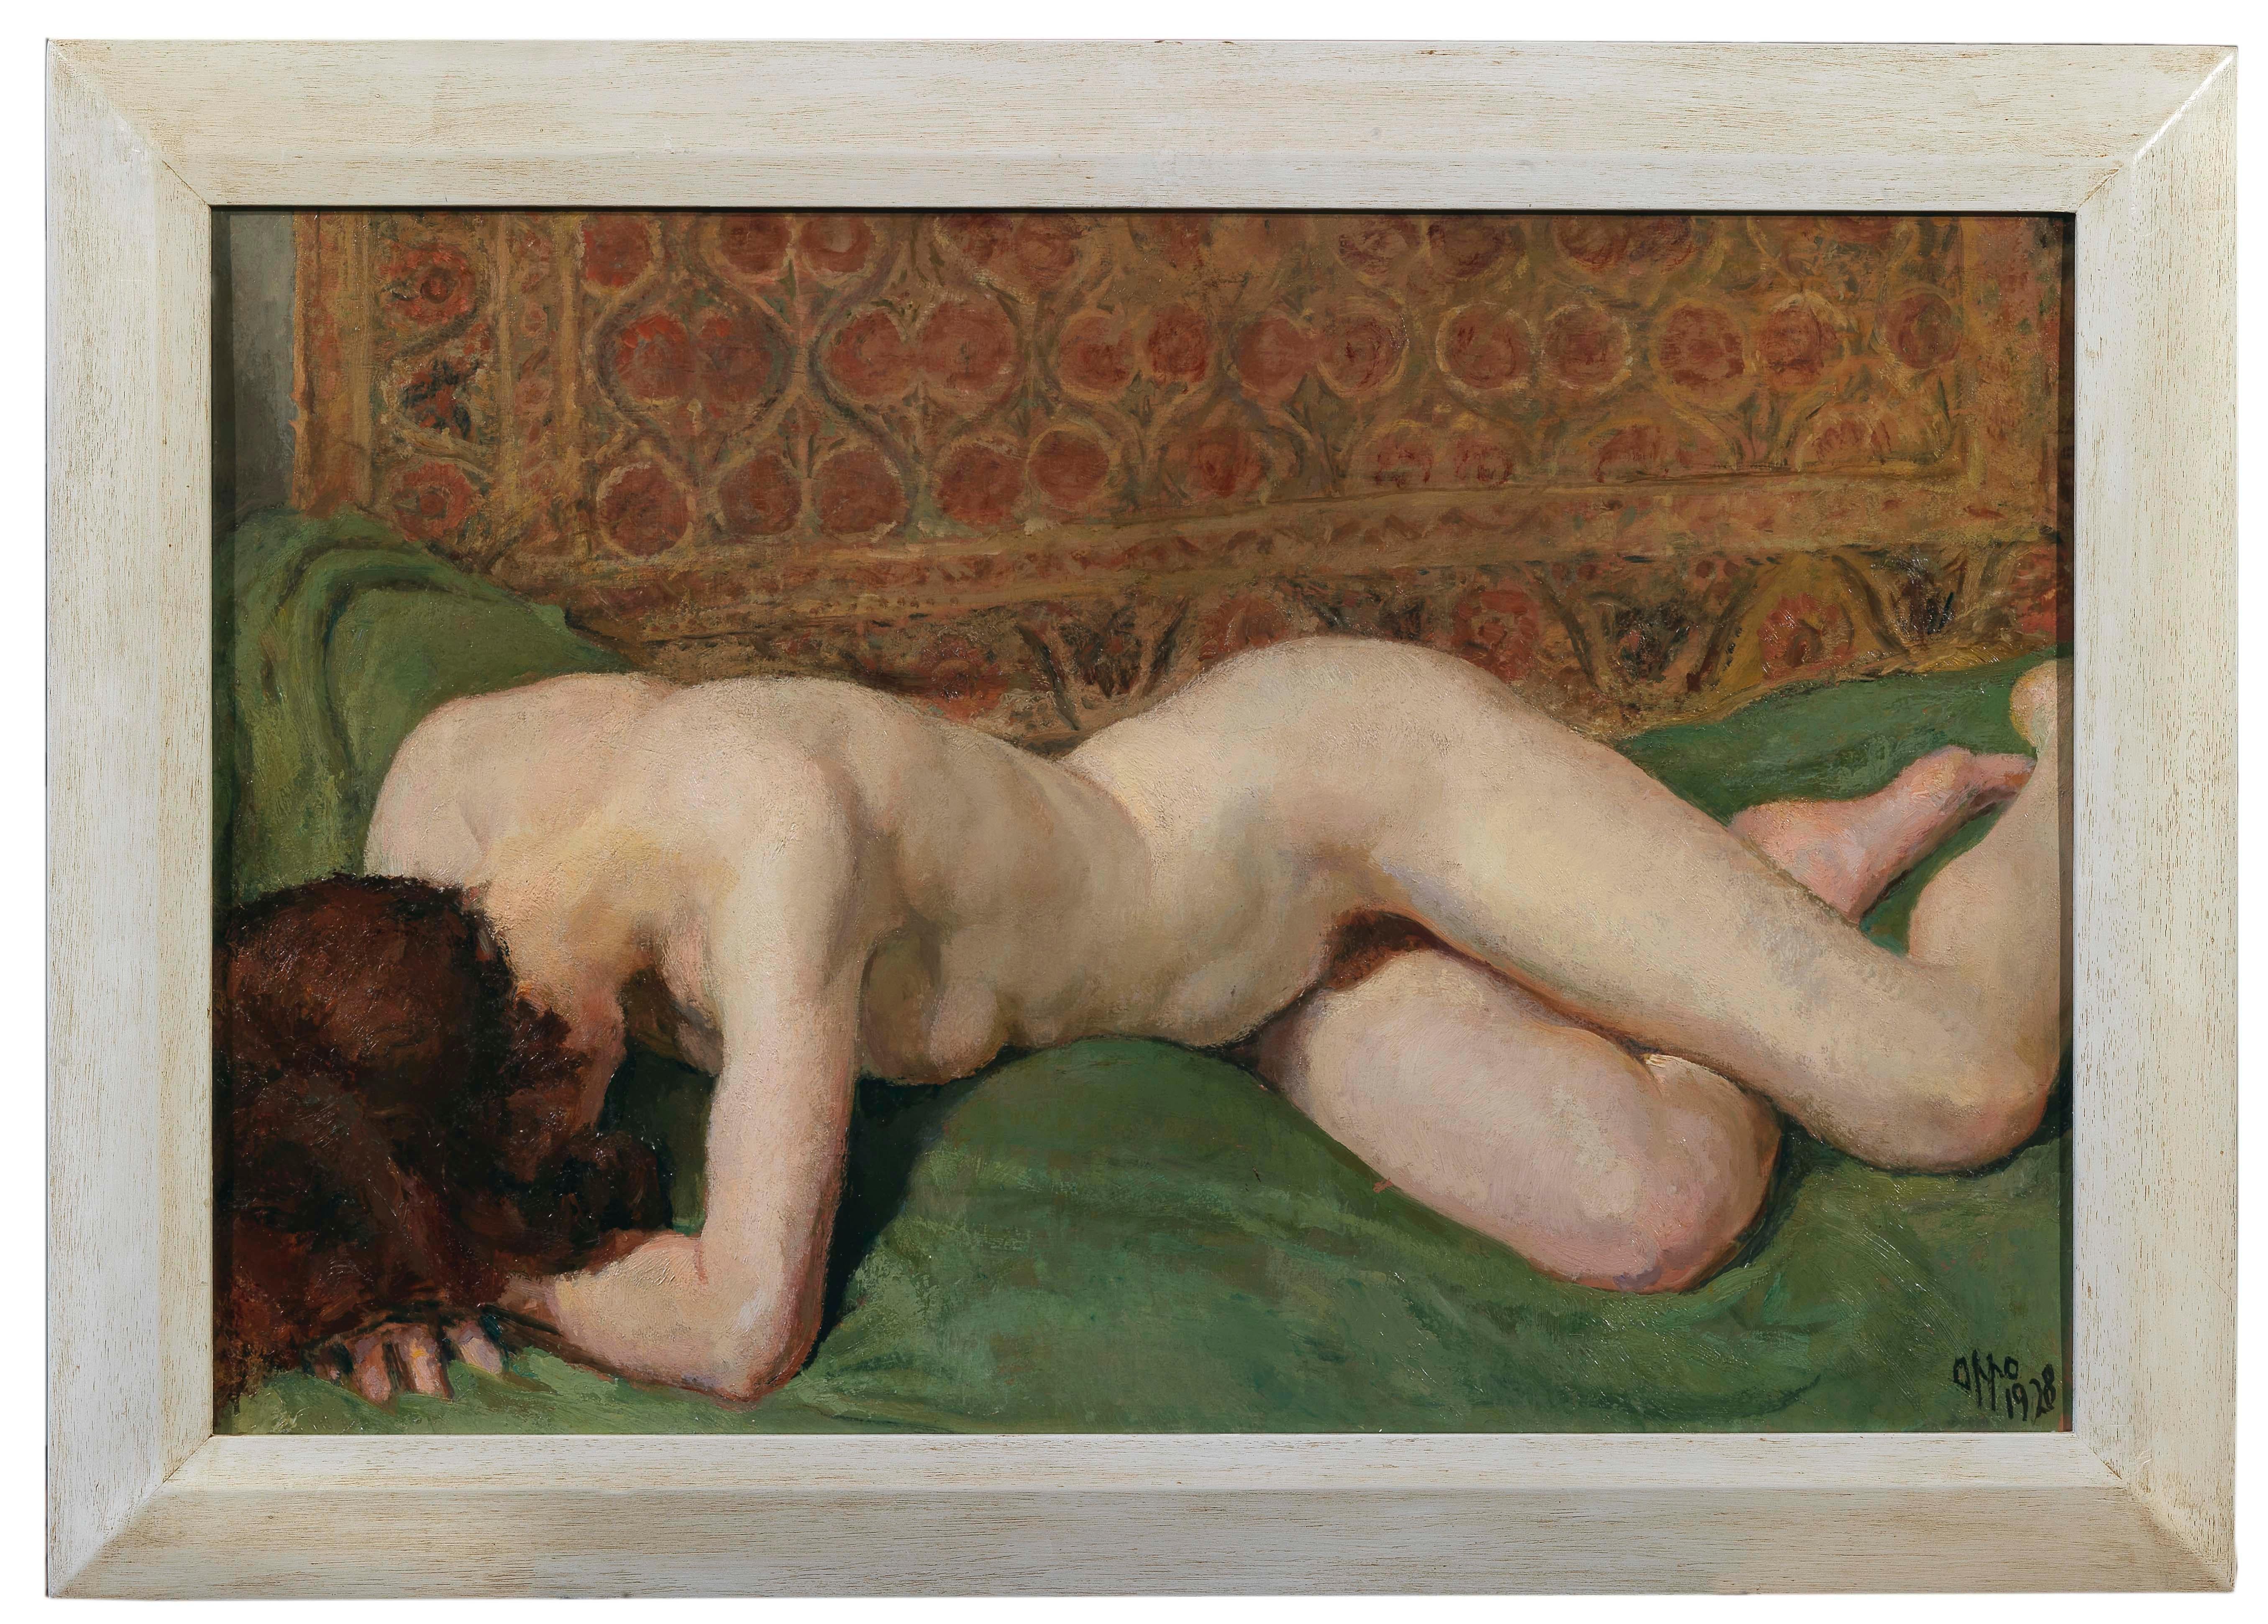 Nude of a woman. Sensual portrait of a girl on a bed with colored tapestries – Painting von Cipriano Efisio Oppo